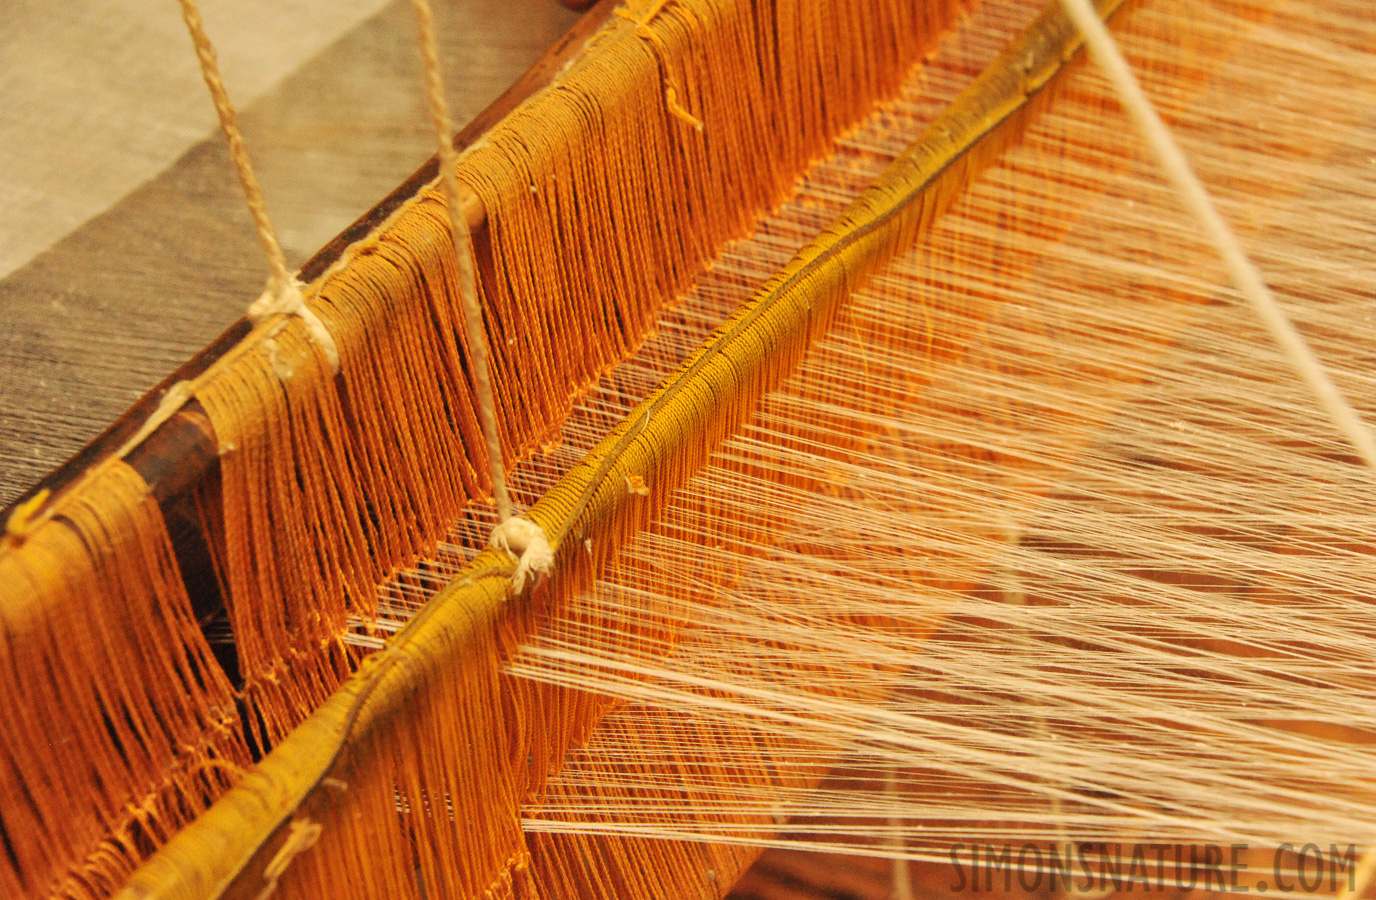 Local weaving [98 mm, 1/125 sec at f / 7.1, ISO 6400]